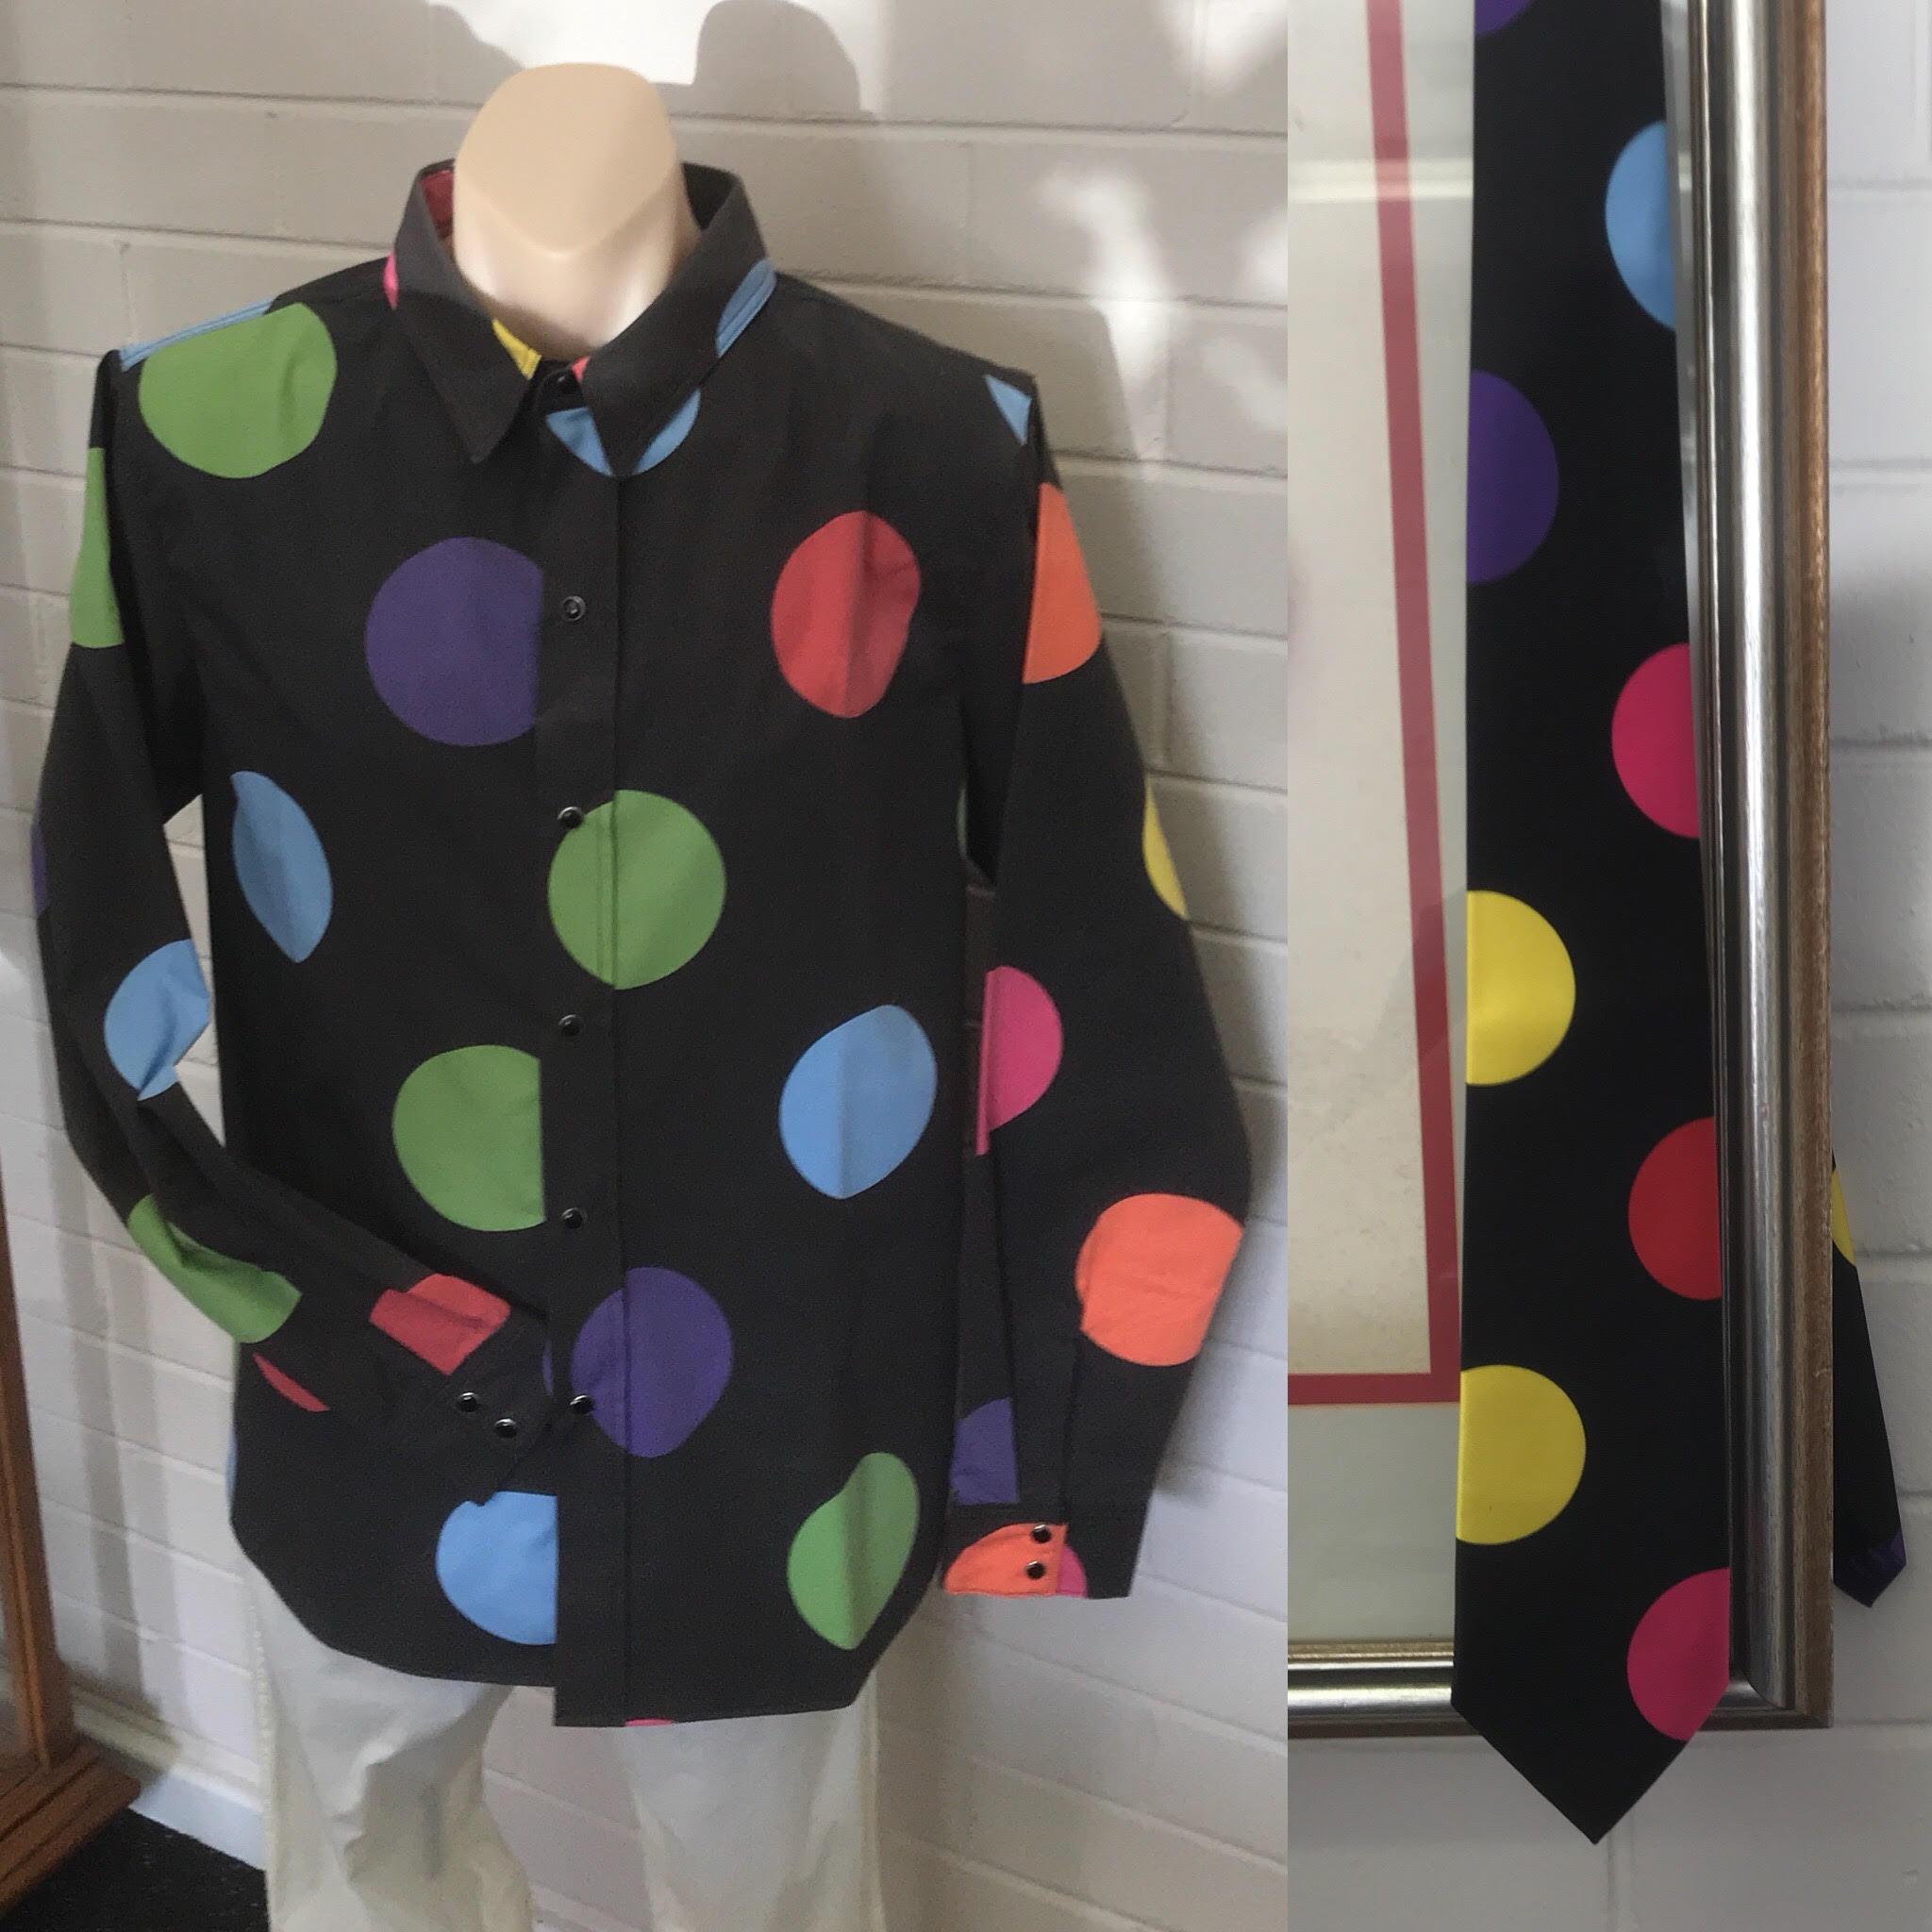 Gannon's Race Day Shirt & Tie set (Fully Sublimated / Sublimation Printing / Made-to-Measure)